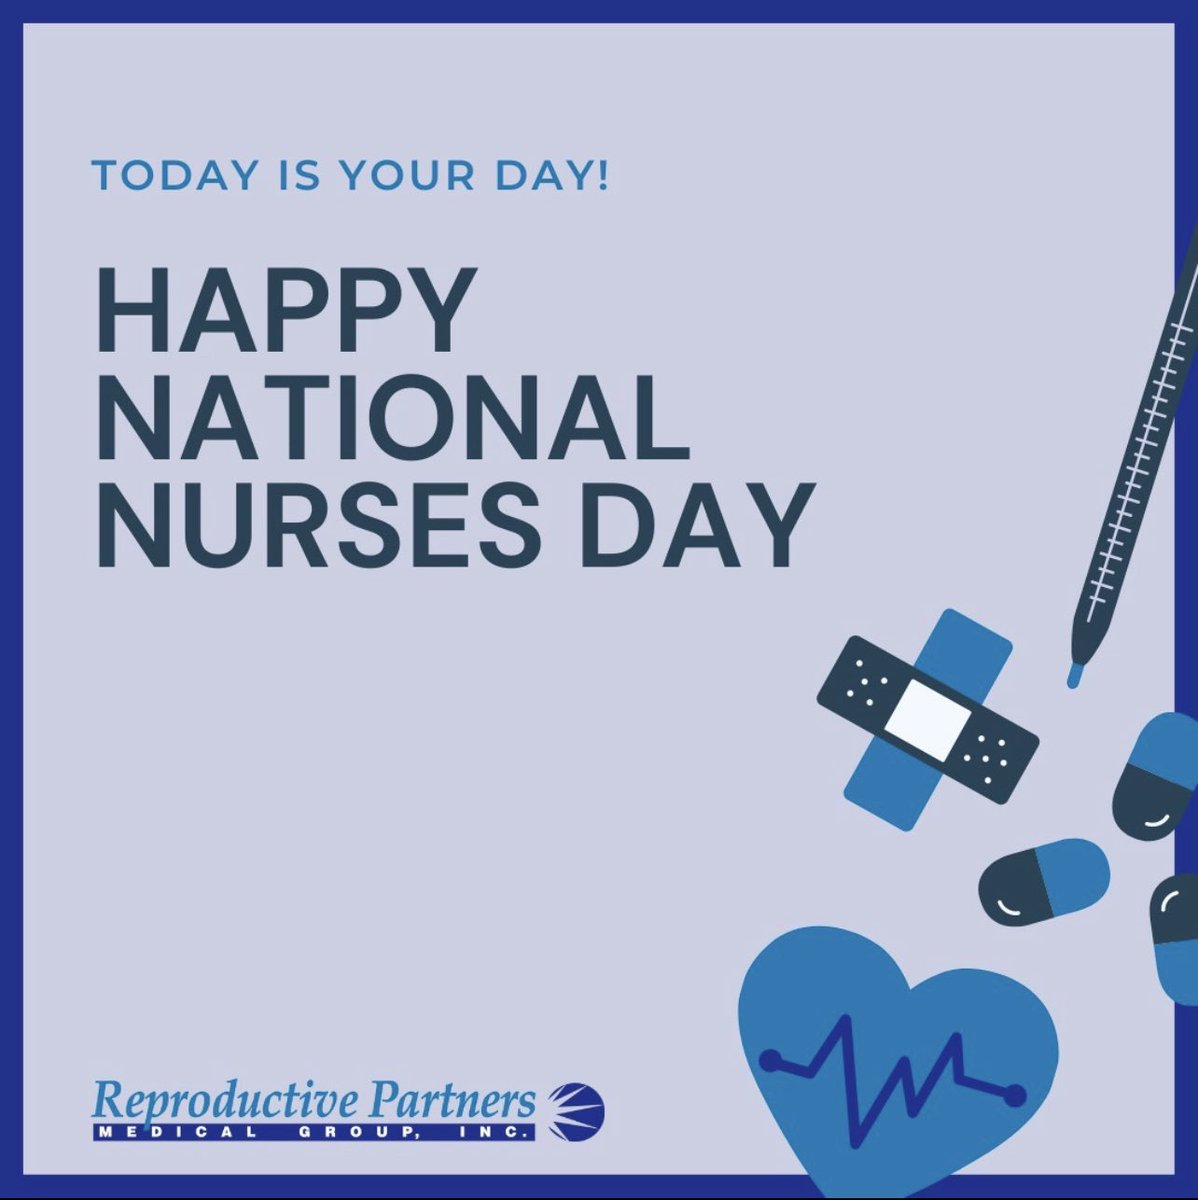 Happy #Nationalnursesday to all of our incredible #RPMG nurses, we are so grateful for all of you! 💙
.
.
.
.
.
#RPMG #IVF #ivfjourney #fertilityjourney #fertilityoutloud #1in8 #fertility #infertility #eggfreezing